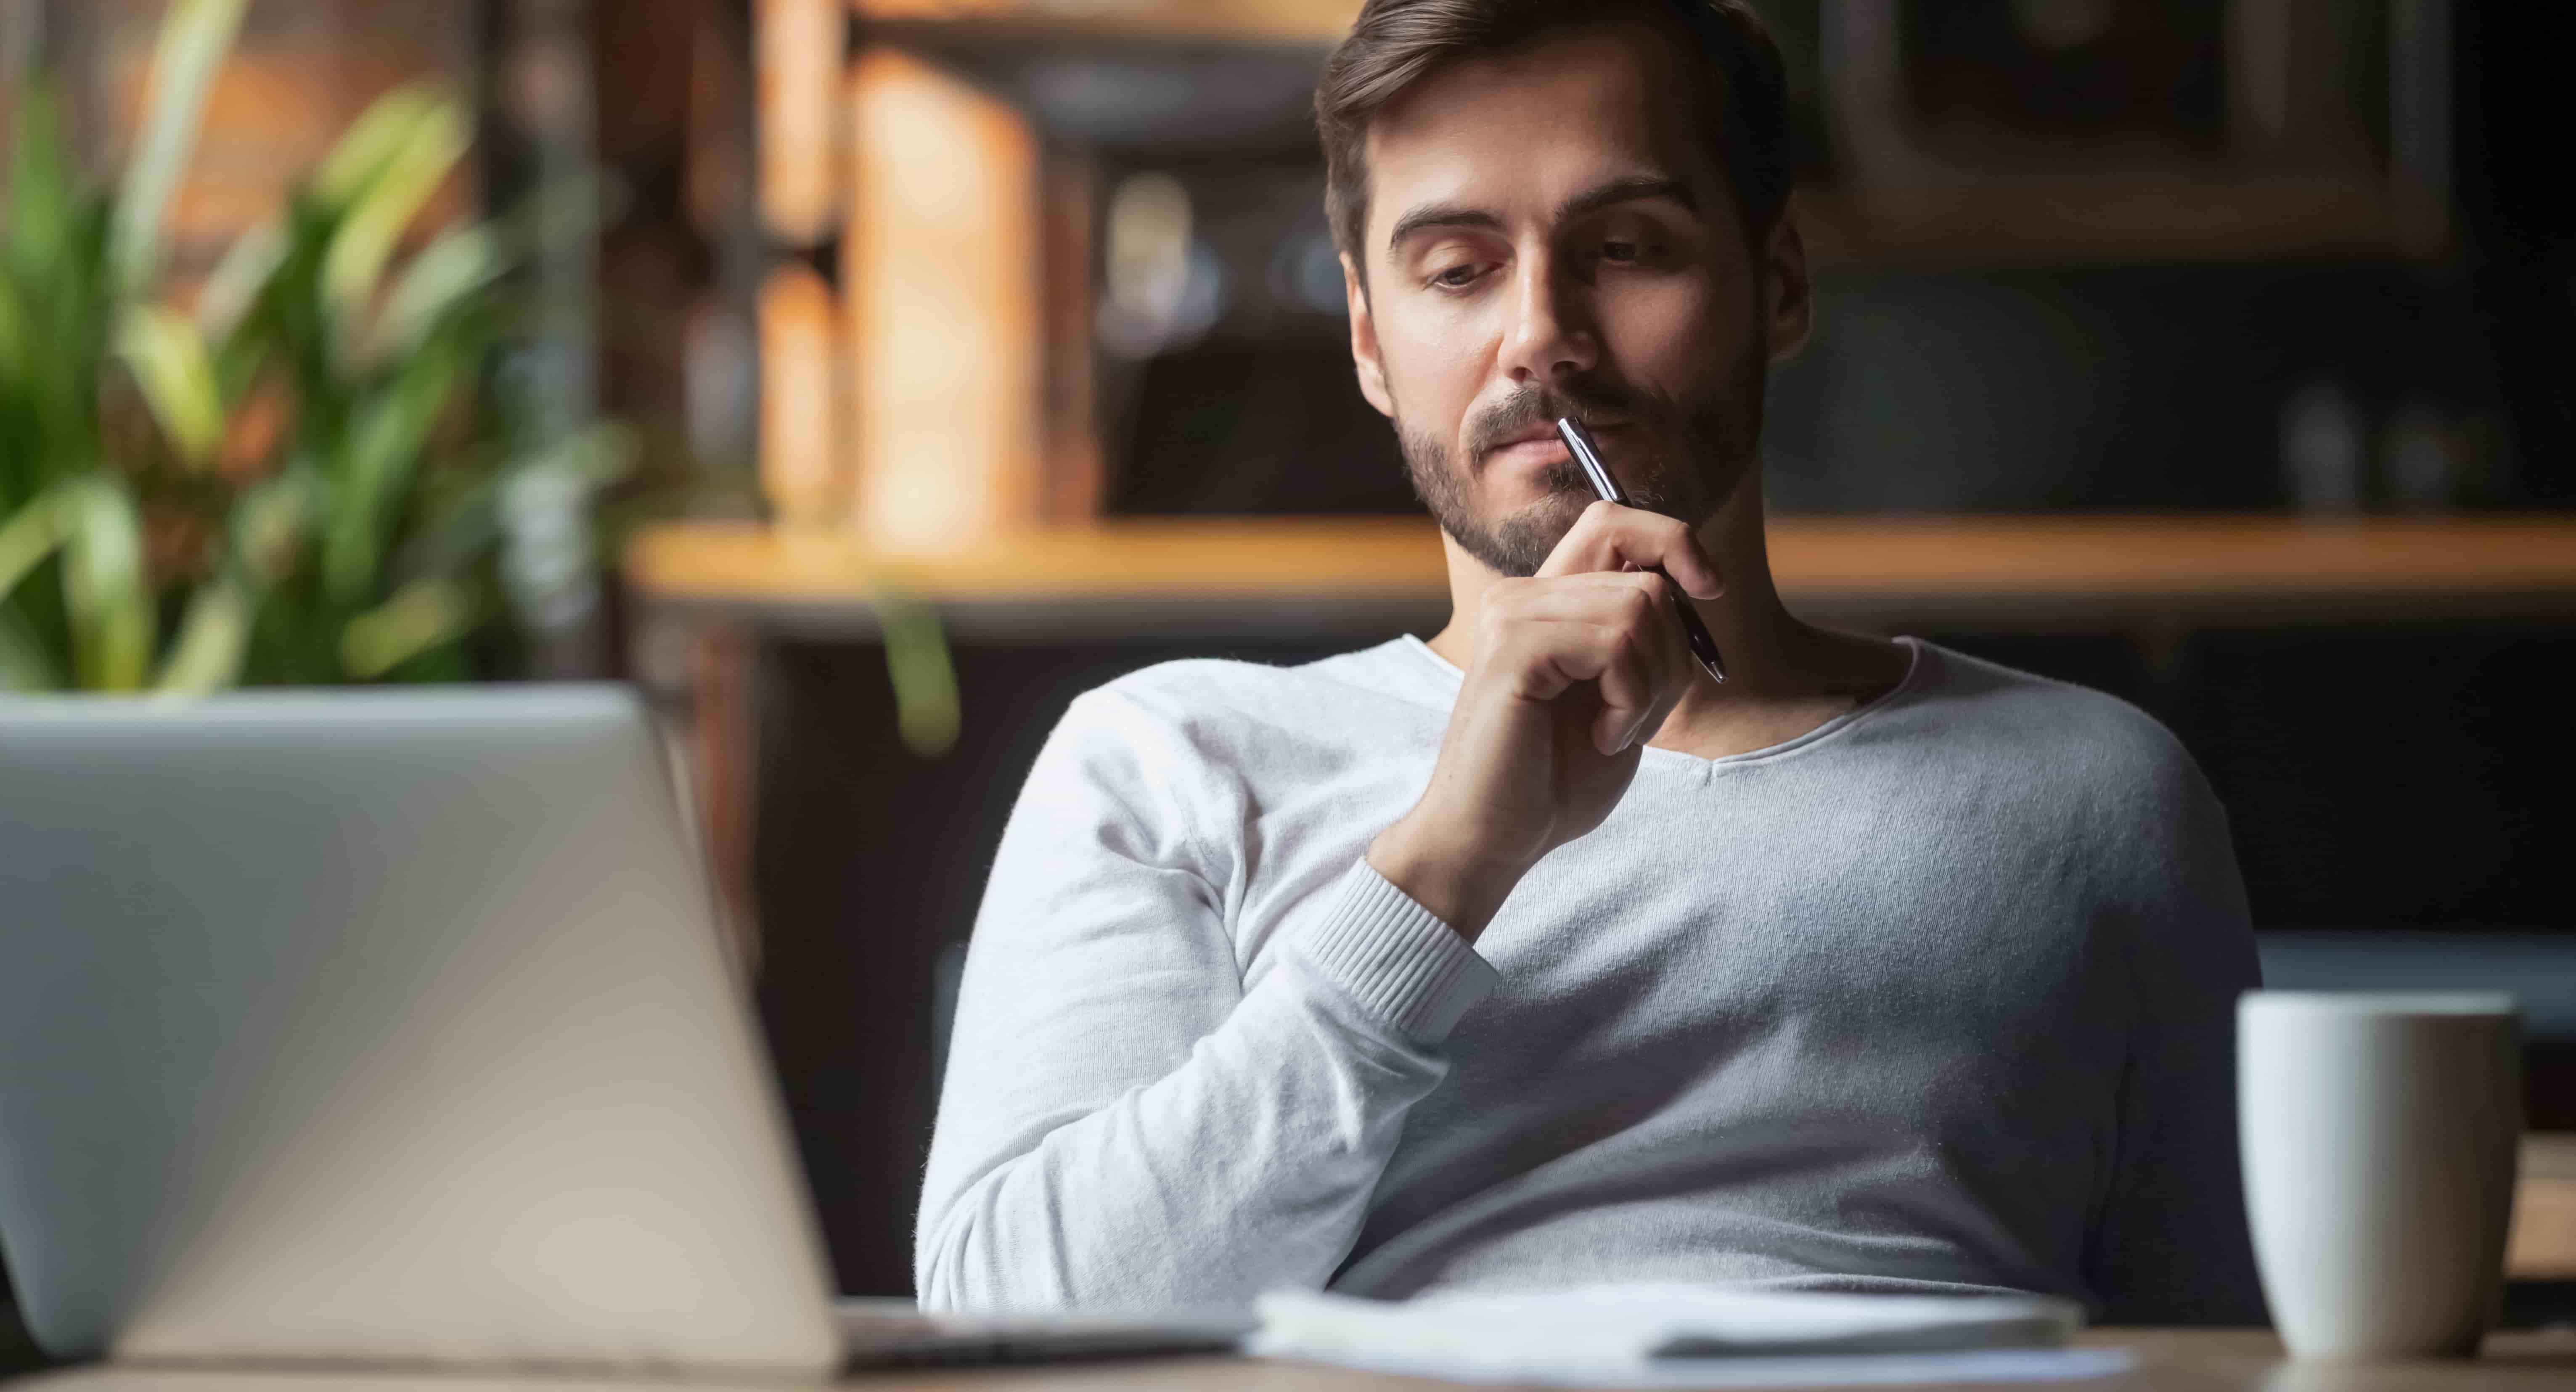 Pensive bearded man sitting at table drink coffee work at laptop thinking of problem solution, thoughtful male employee pondering considering idea looking at computer screen making decision